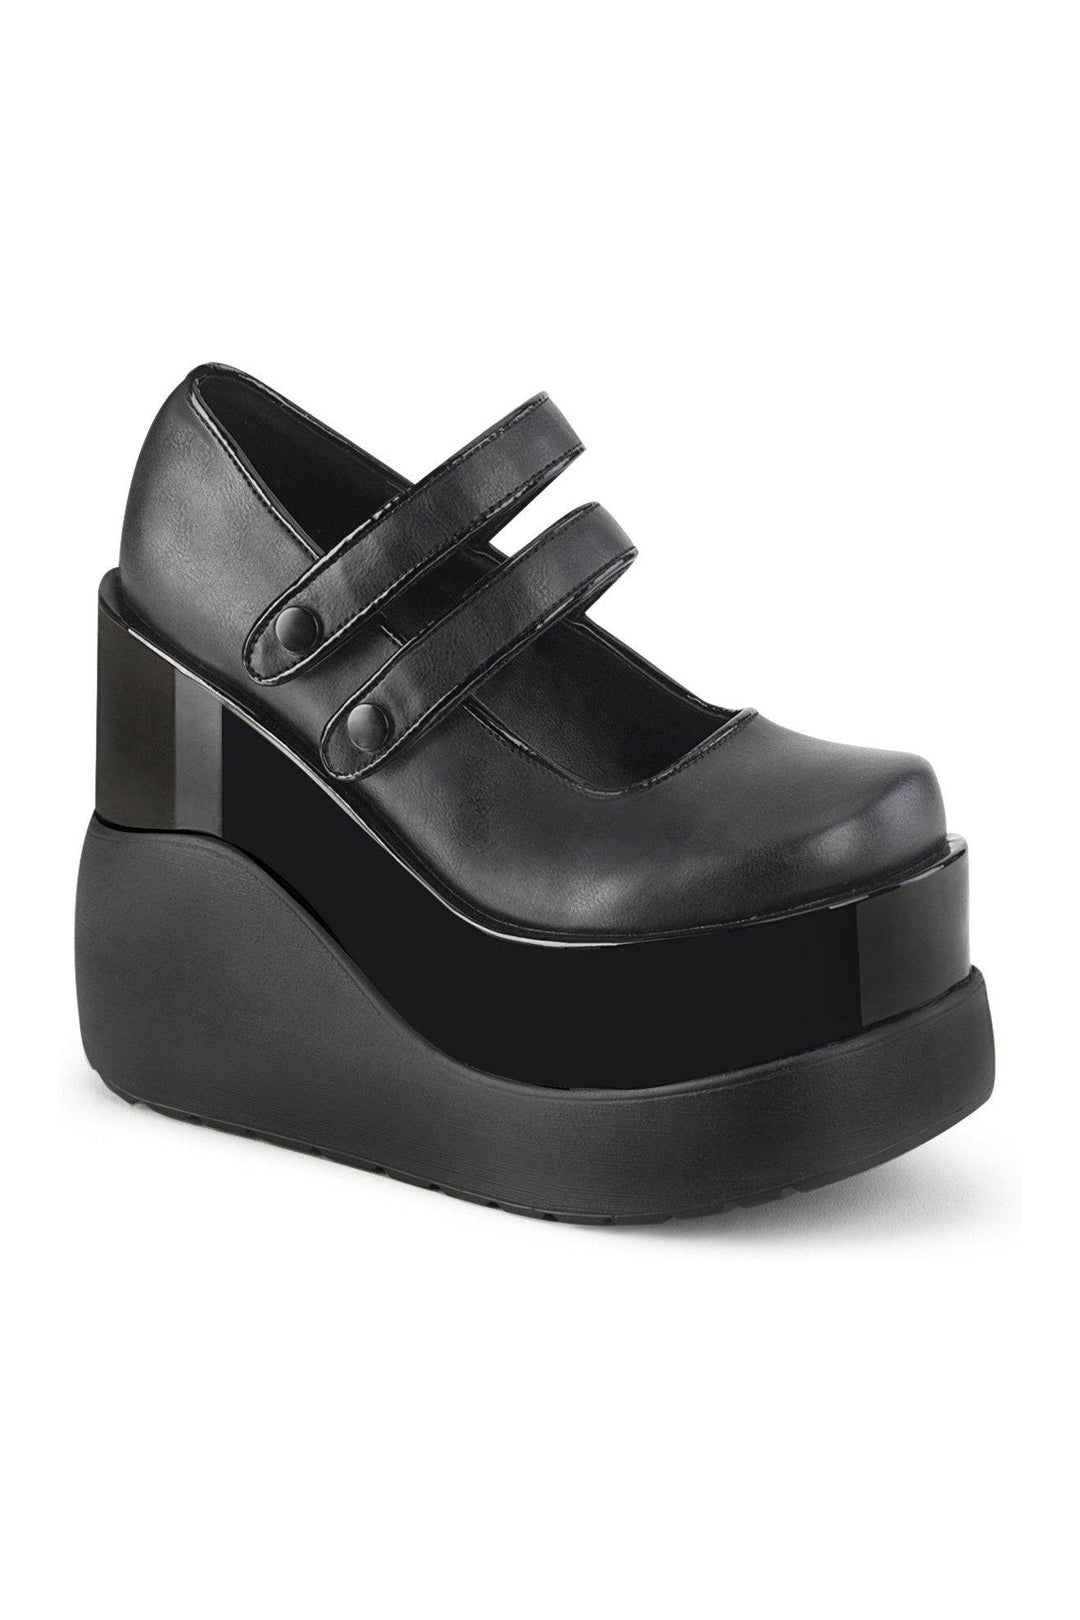 VOID-37 Mary Jane | Black Faux Leather-Mary Janes-Demonia-SEXYSHOES.COM